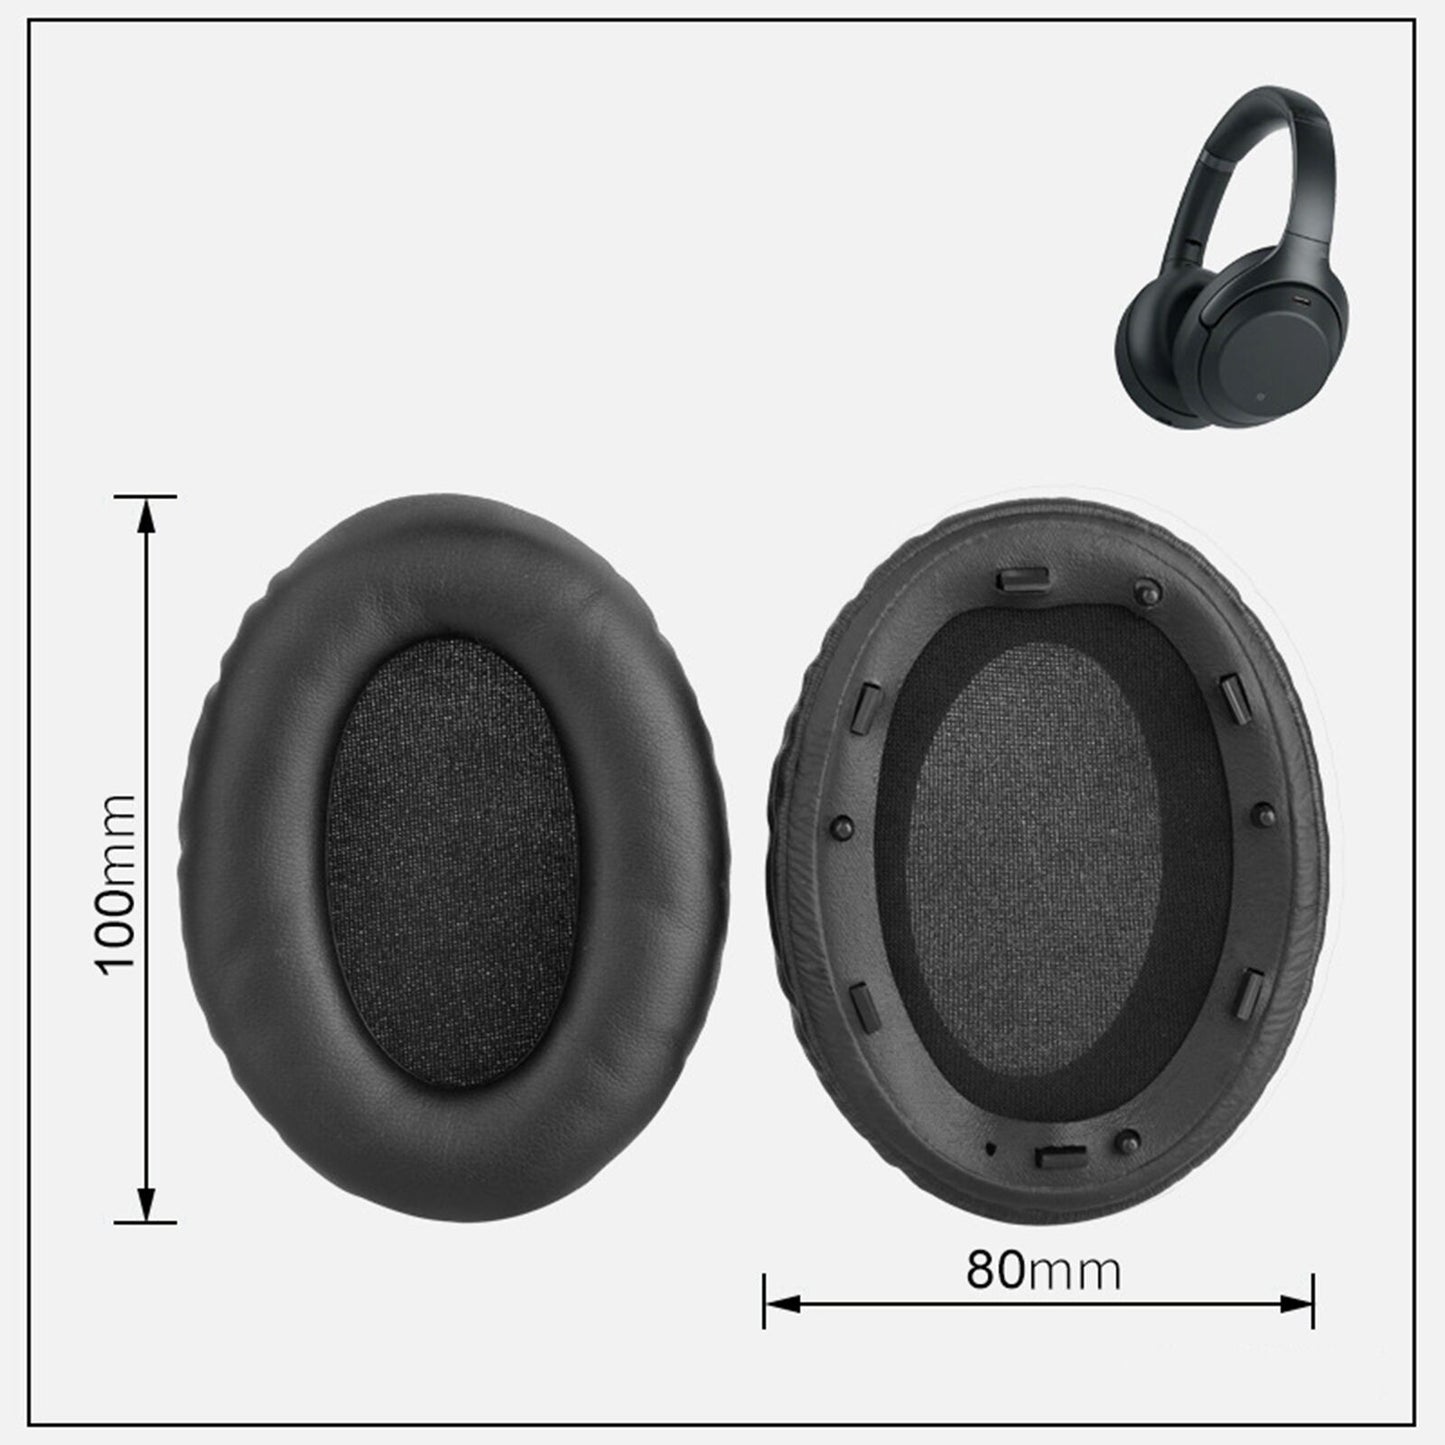 Replacement Ear Pad Cushion for Sony WH-1000XM3/WH-1000X M3 Over-Ear Headphone